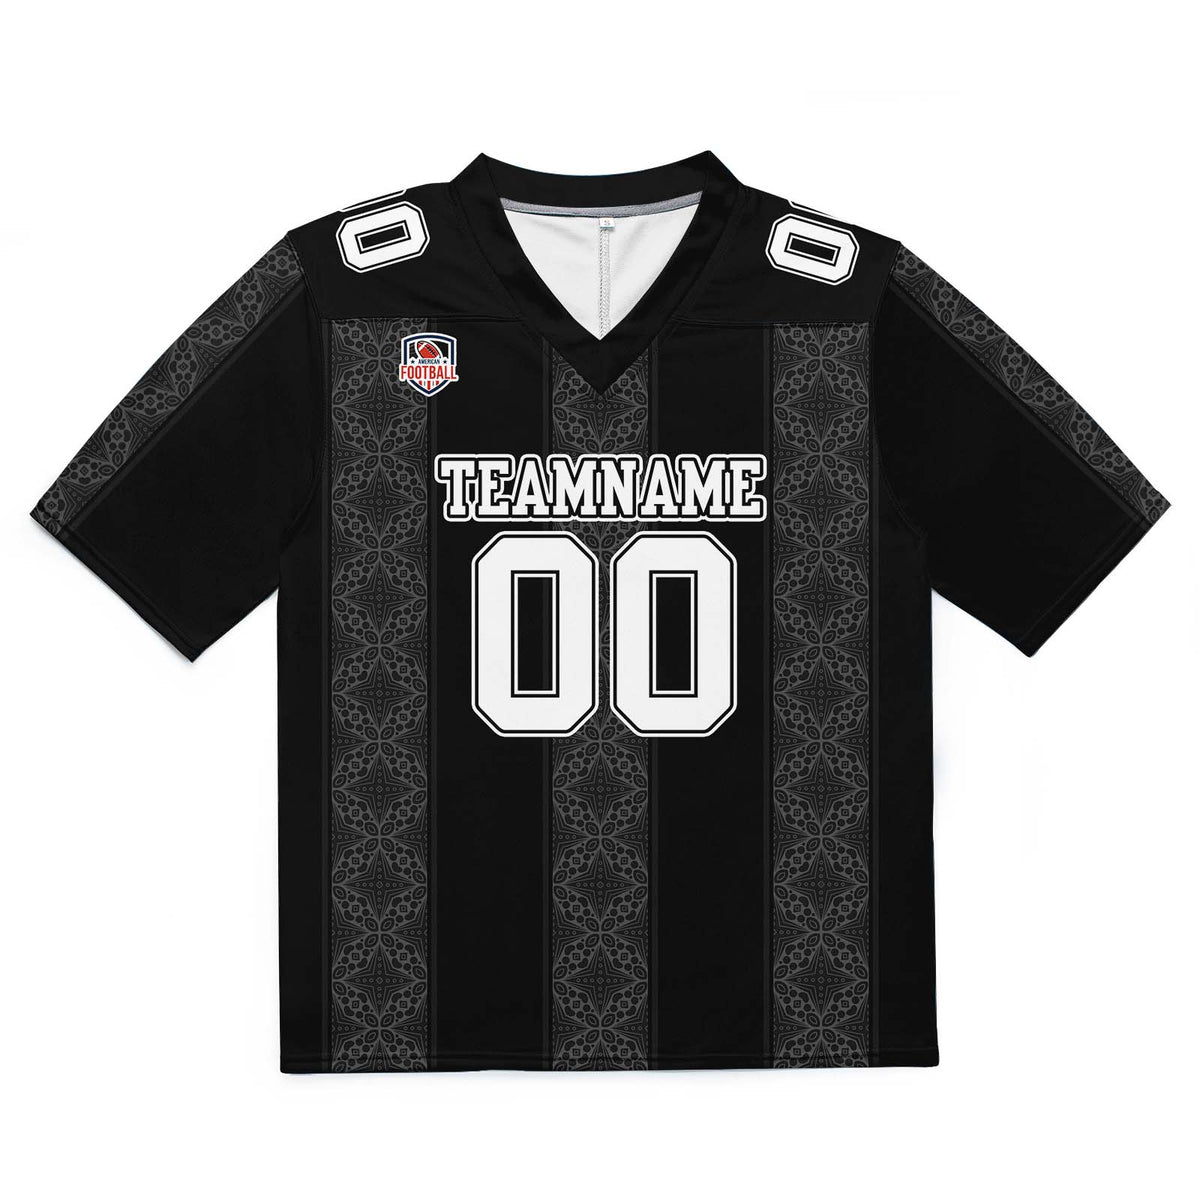 Custom Football Jersey Shirt Personalized Stitched Printed Team Name Number Stripe-Black